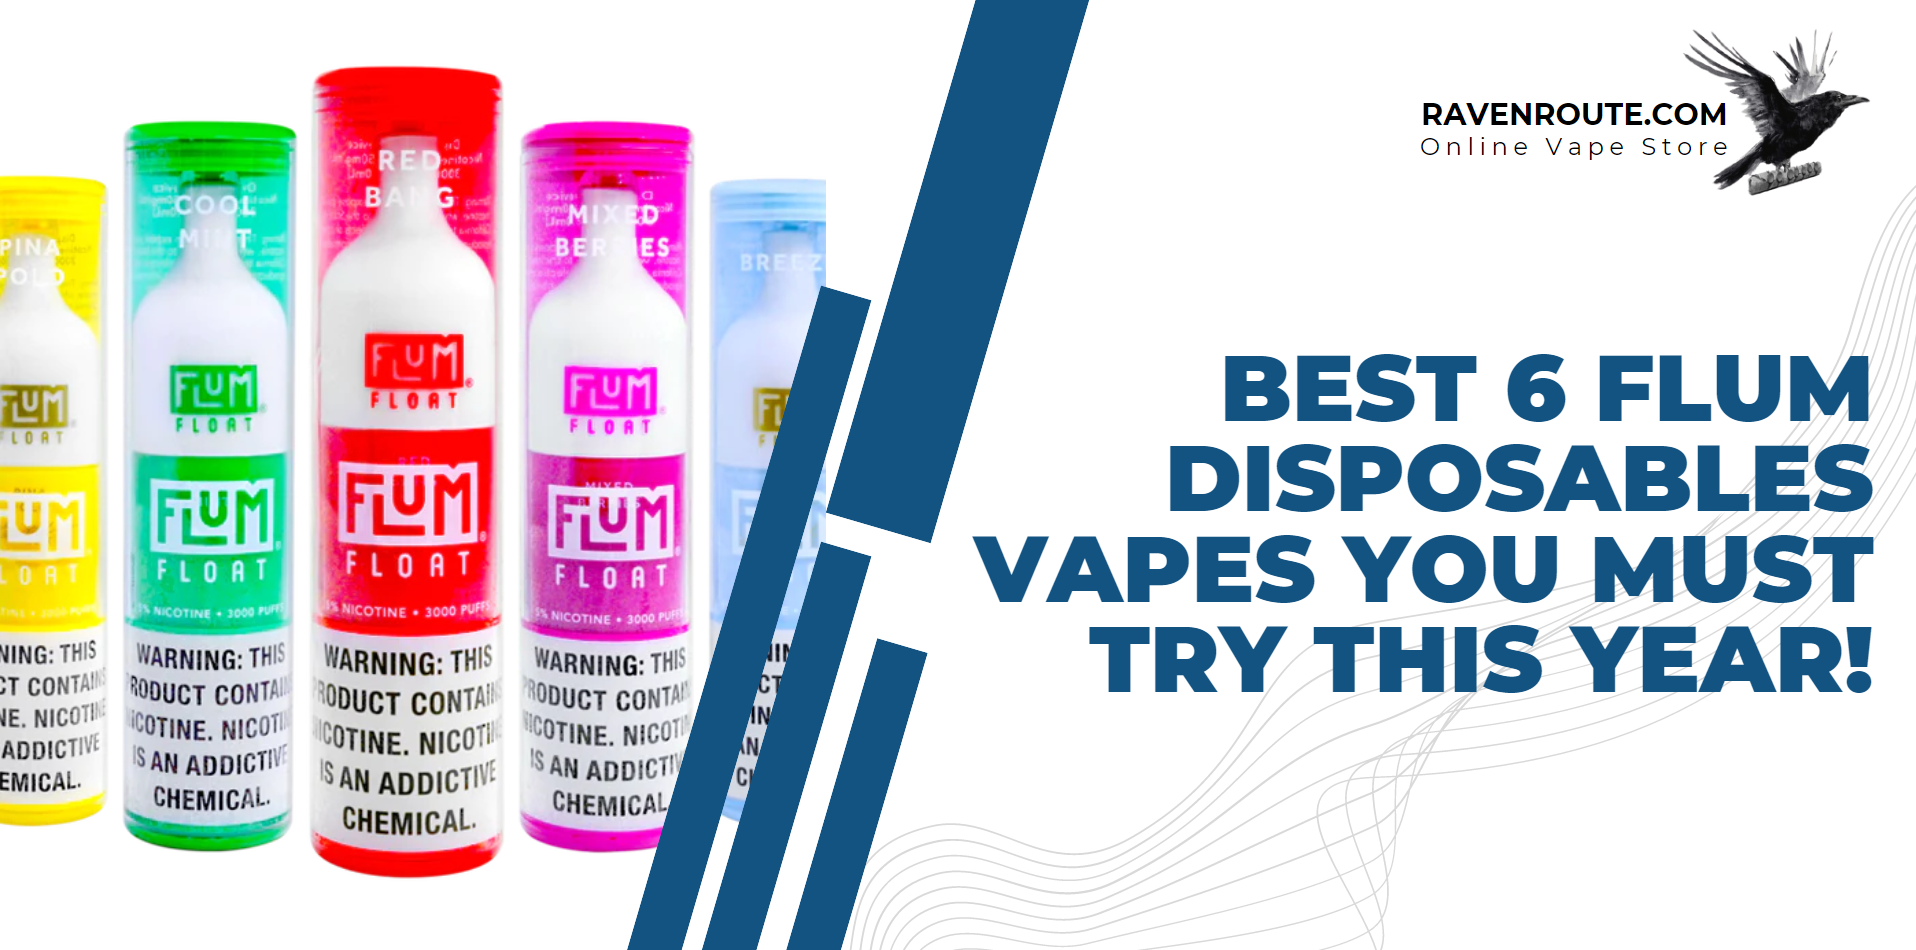 Best 6 Flum Disposables Vapes You Must Try This Year!